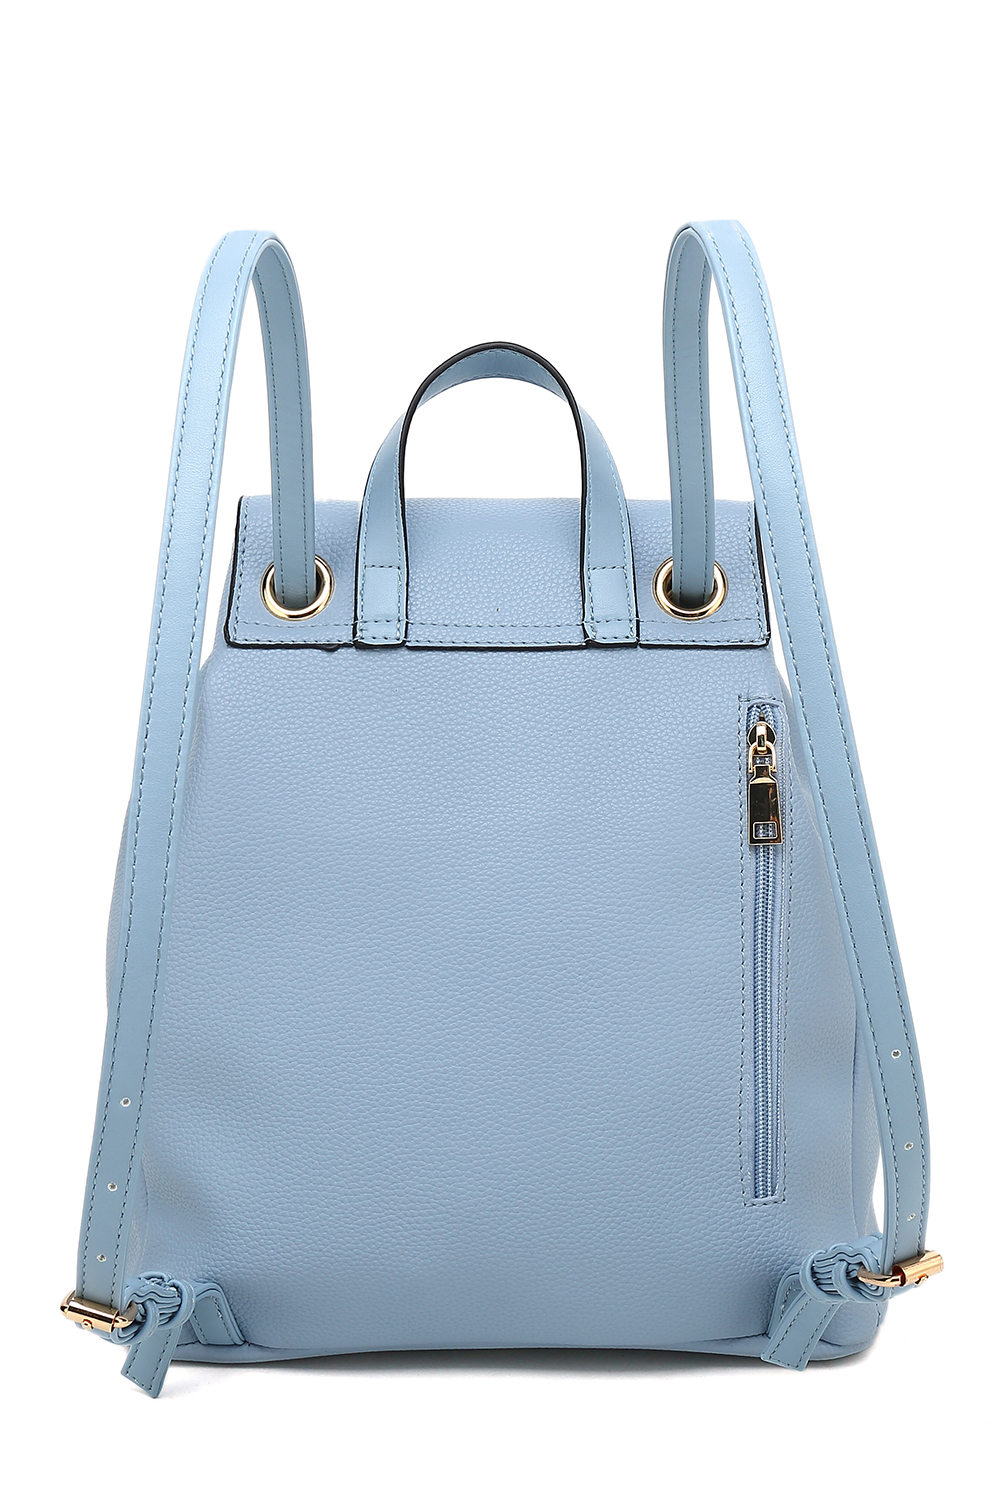 MKF Collection Priscila Backpack by Mia K. Farrow - image 3 of 4